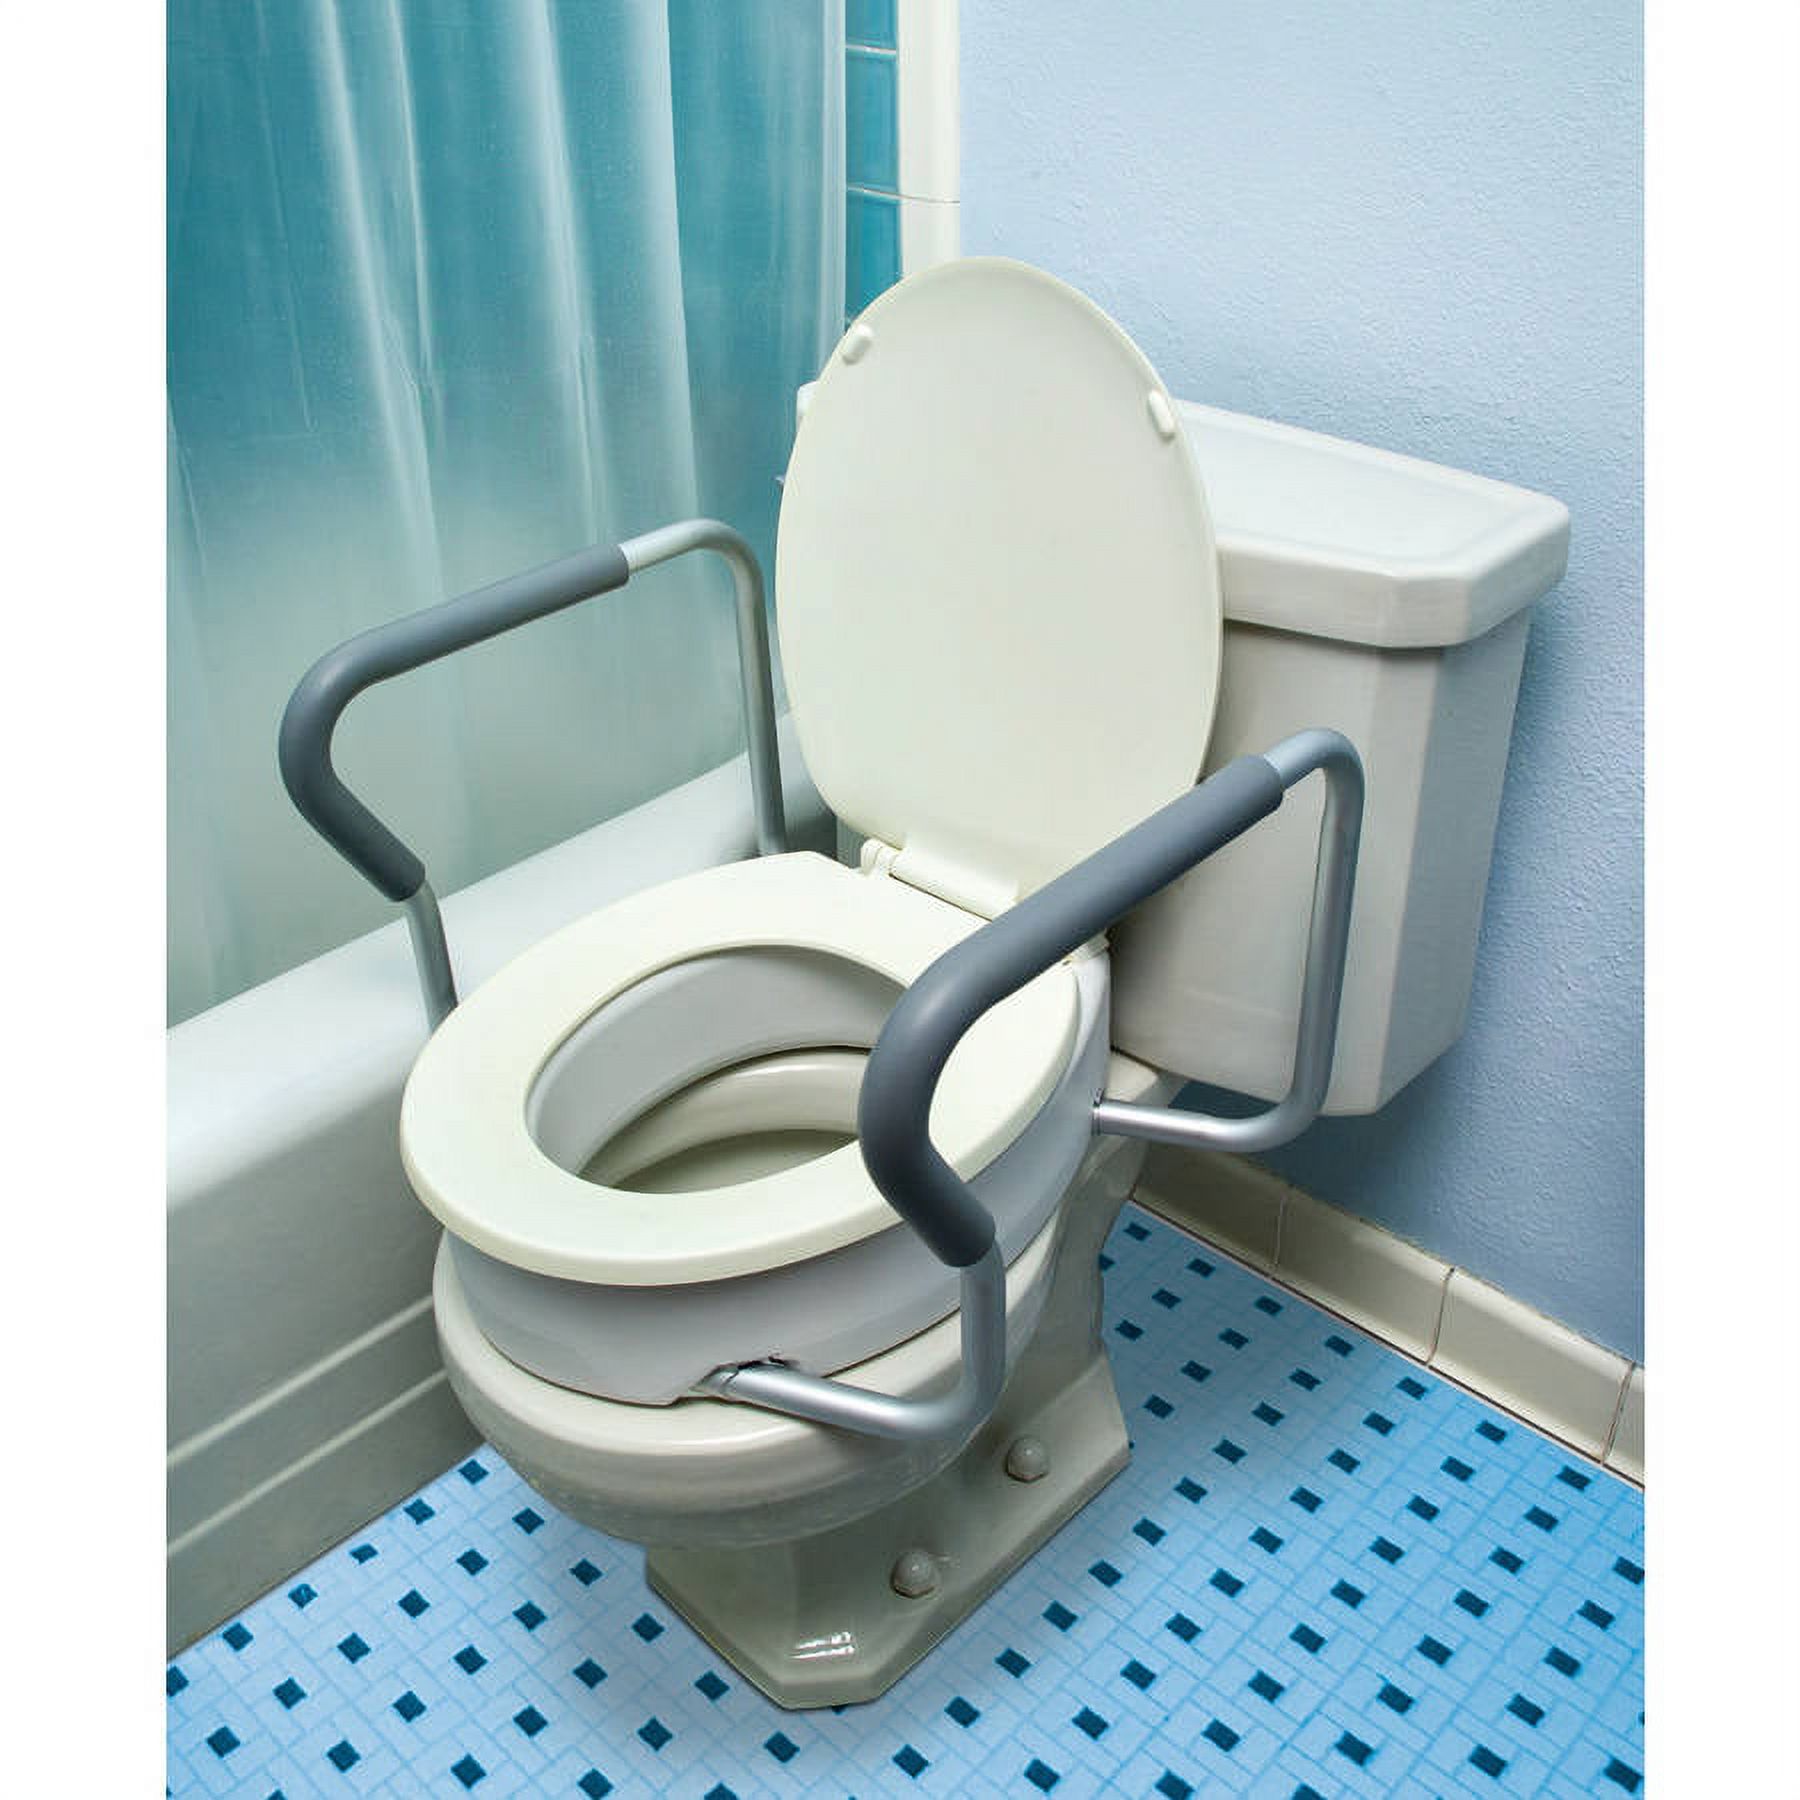 Essential Medical Supply Raised Elevated Toilet Seat Riser for a Standard Round Bowl with Padded Aluminum Arms for Support and Compatible with Existing Seat - image 3 of 8